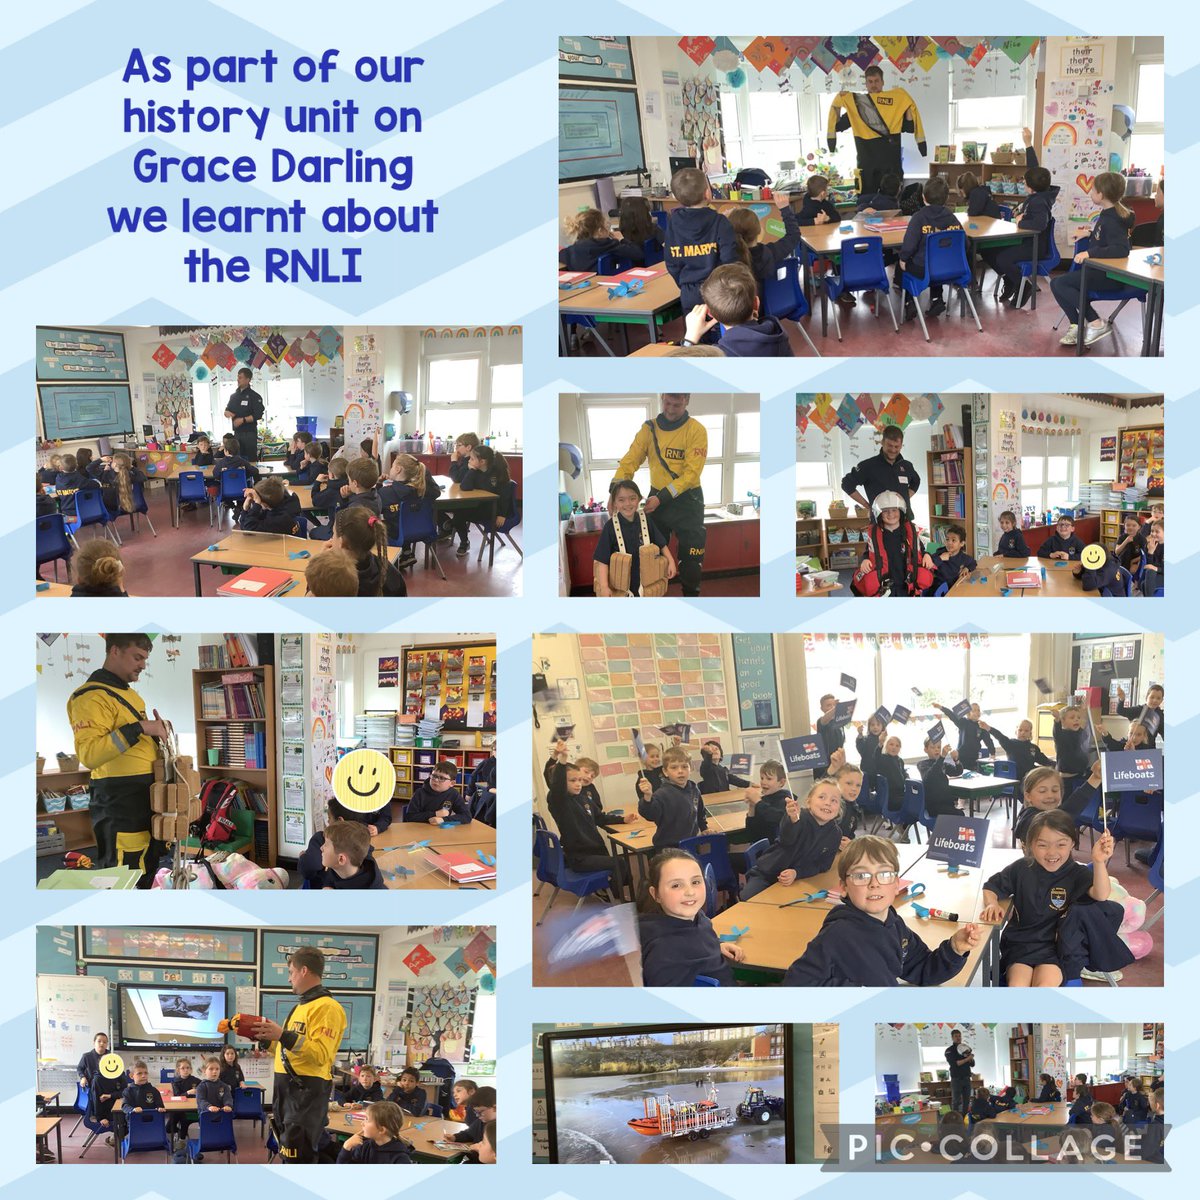 Year 2 welcomed Mr Bateman from Cullercoats RNLI to talk to them about their work as part of their History unit on Grace Darling. @RNLI @CullercoatsB811